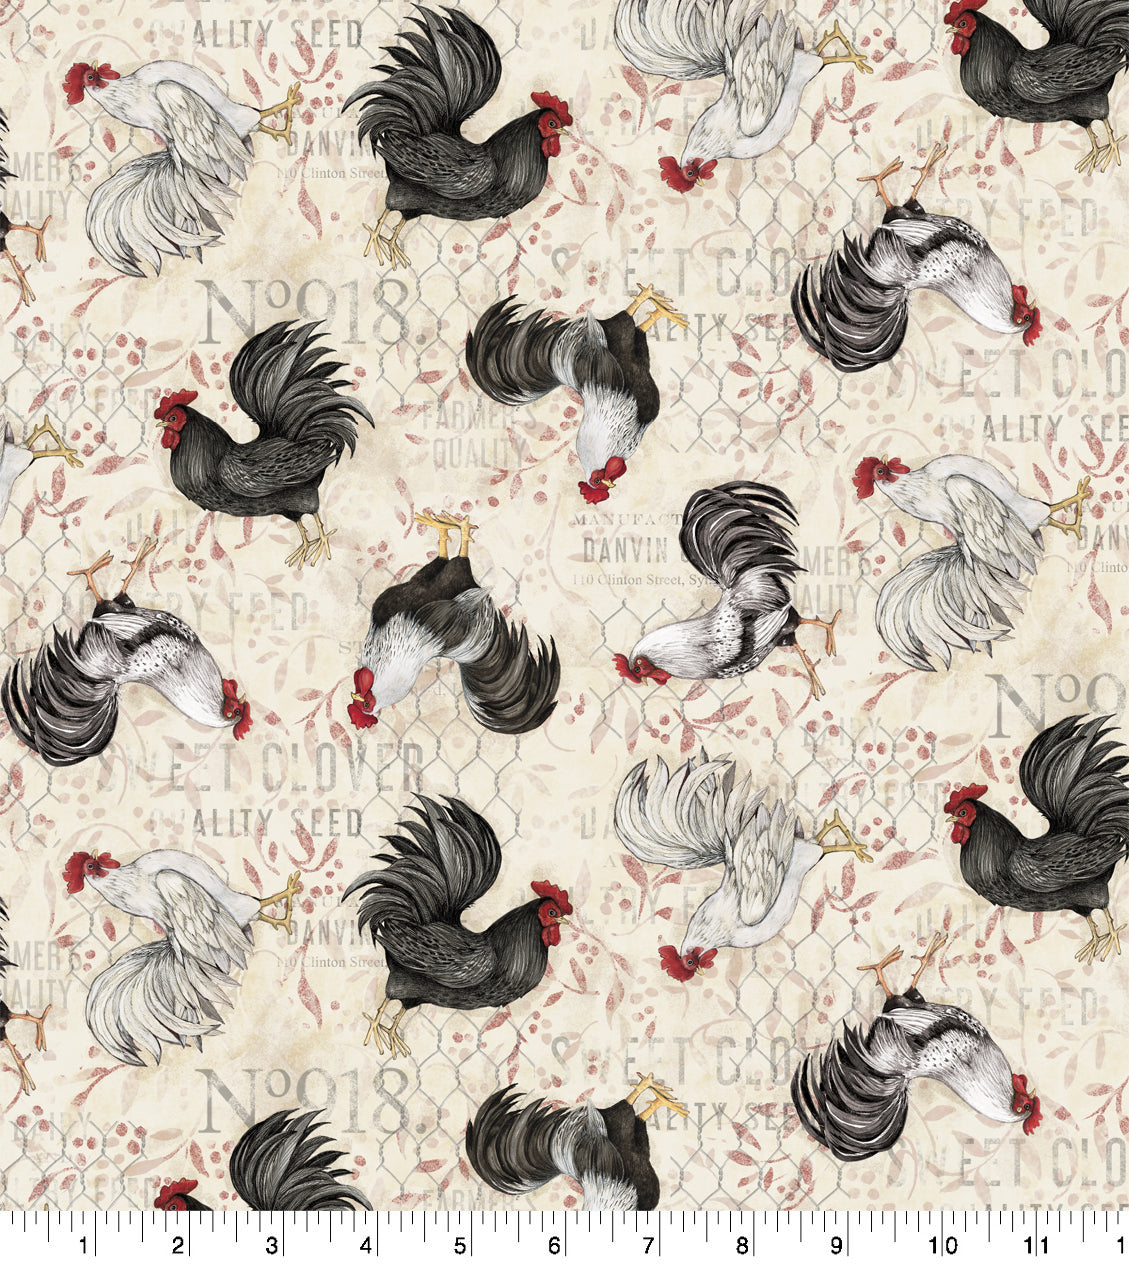 Farmhouse Rooster Toss Seed Bag Fabric